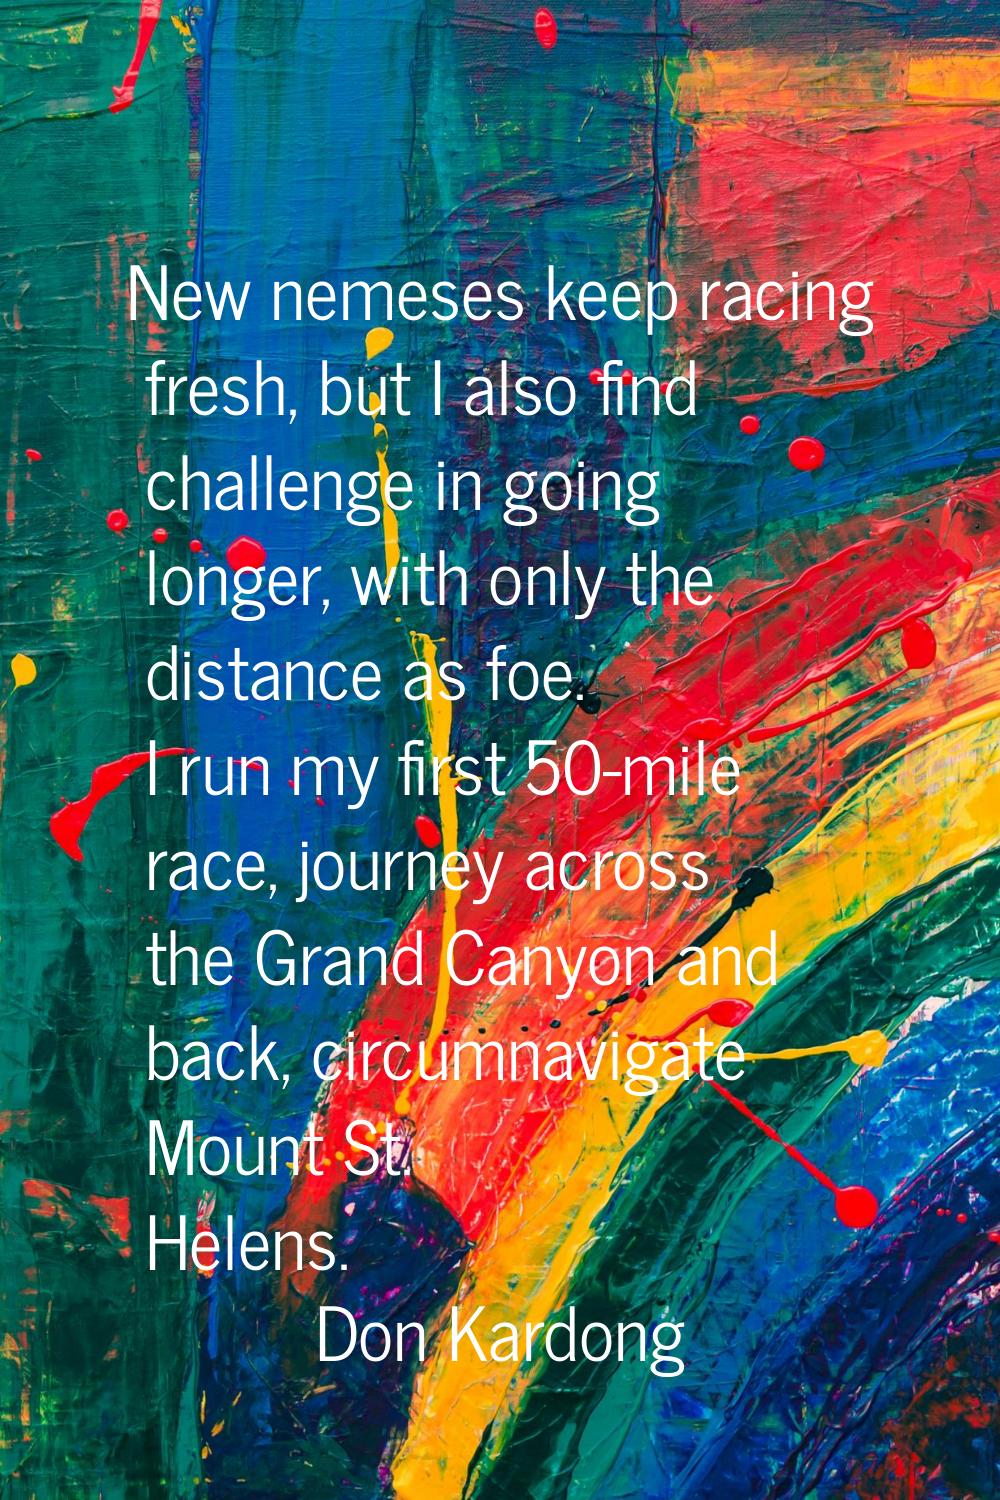 New nemeses keep racing fresh, but I also find challenge in going longer, with only the distance as